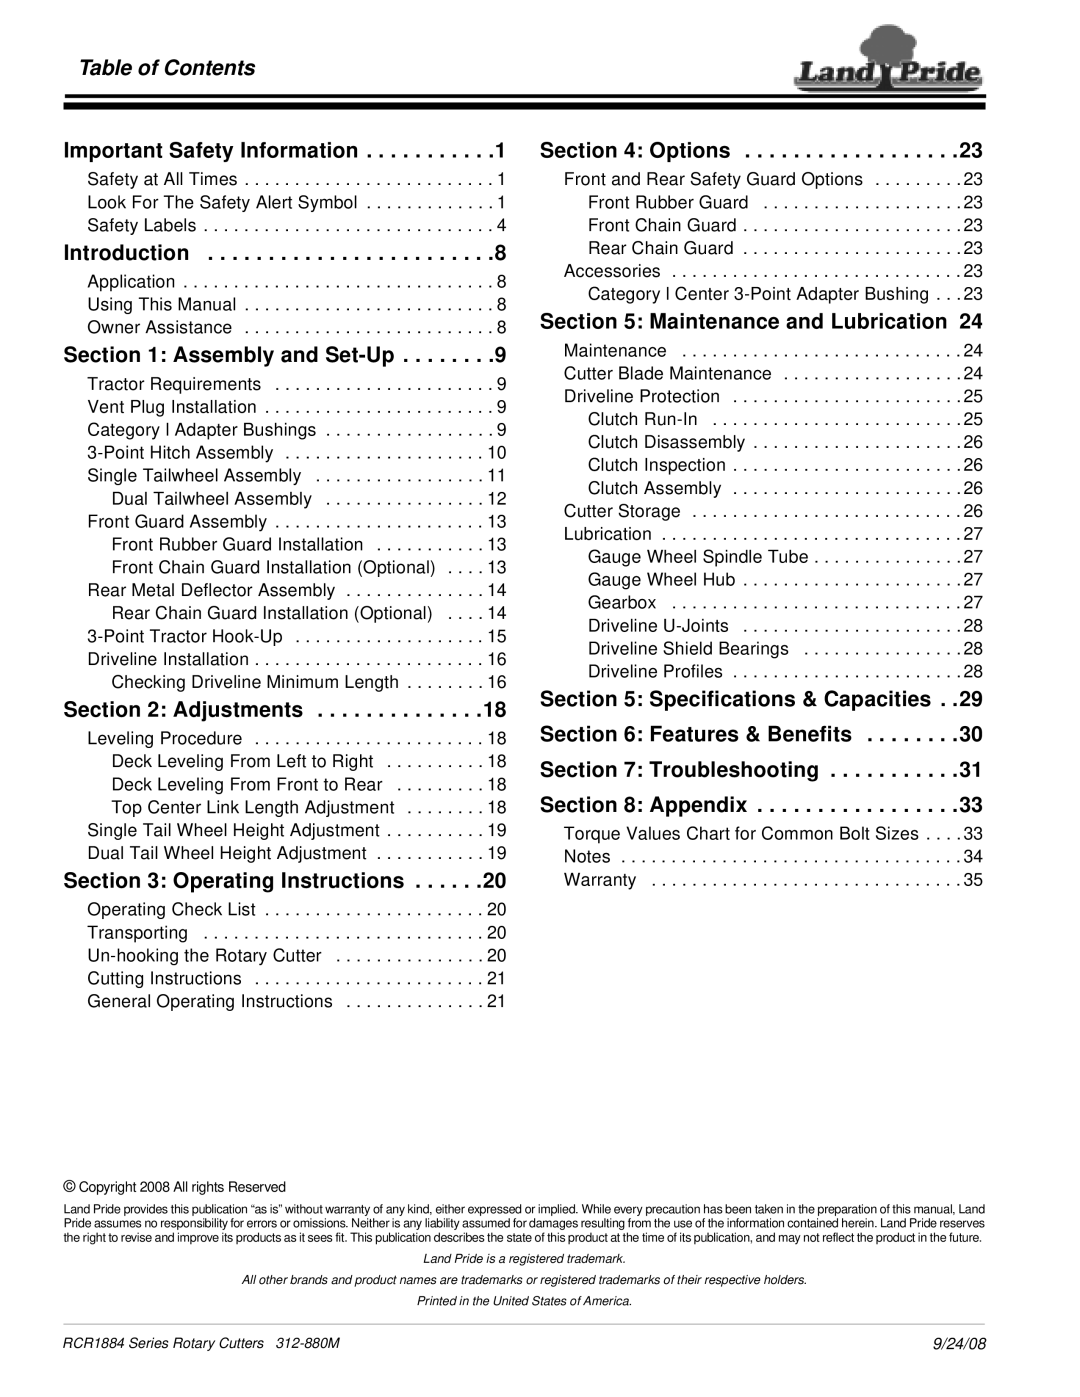 Land Pride RCR1884 manual Table of Contents 